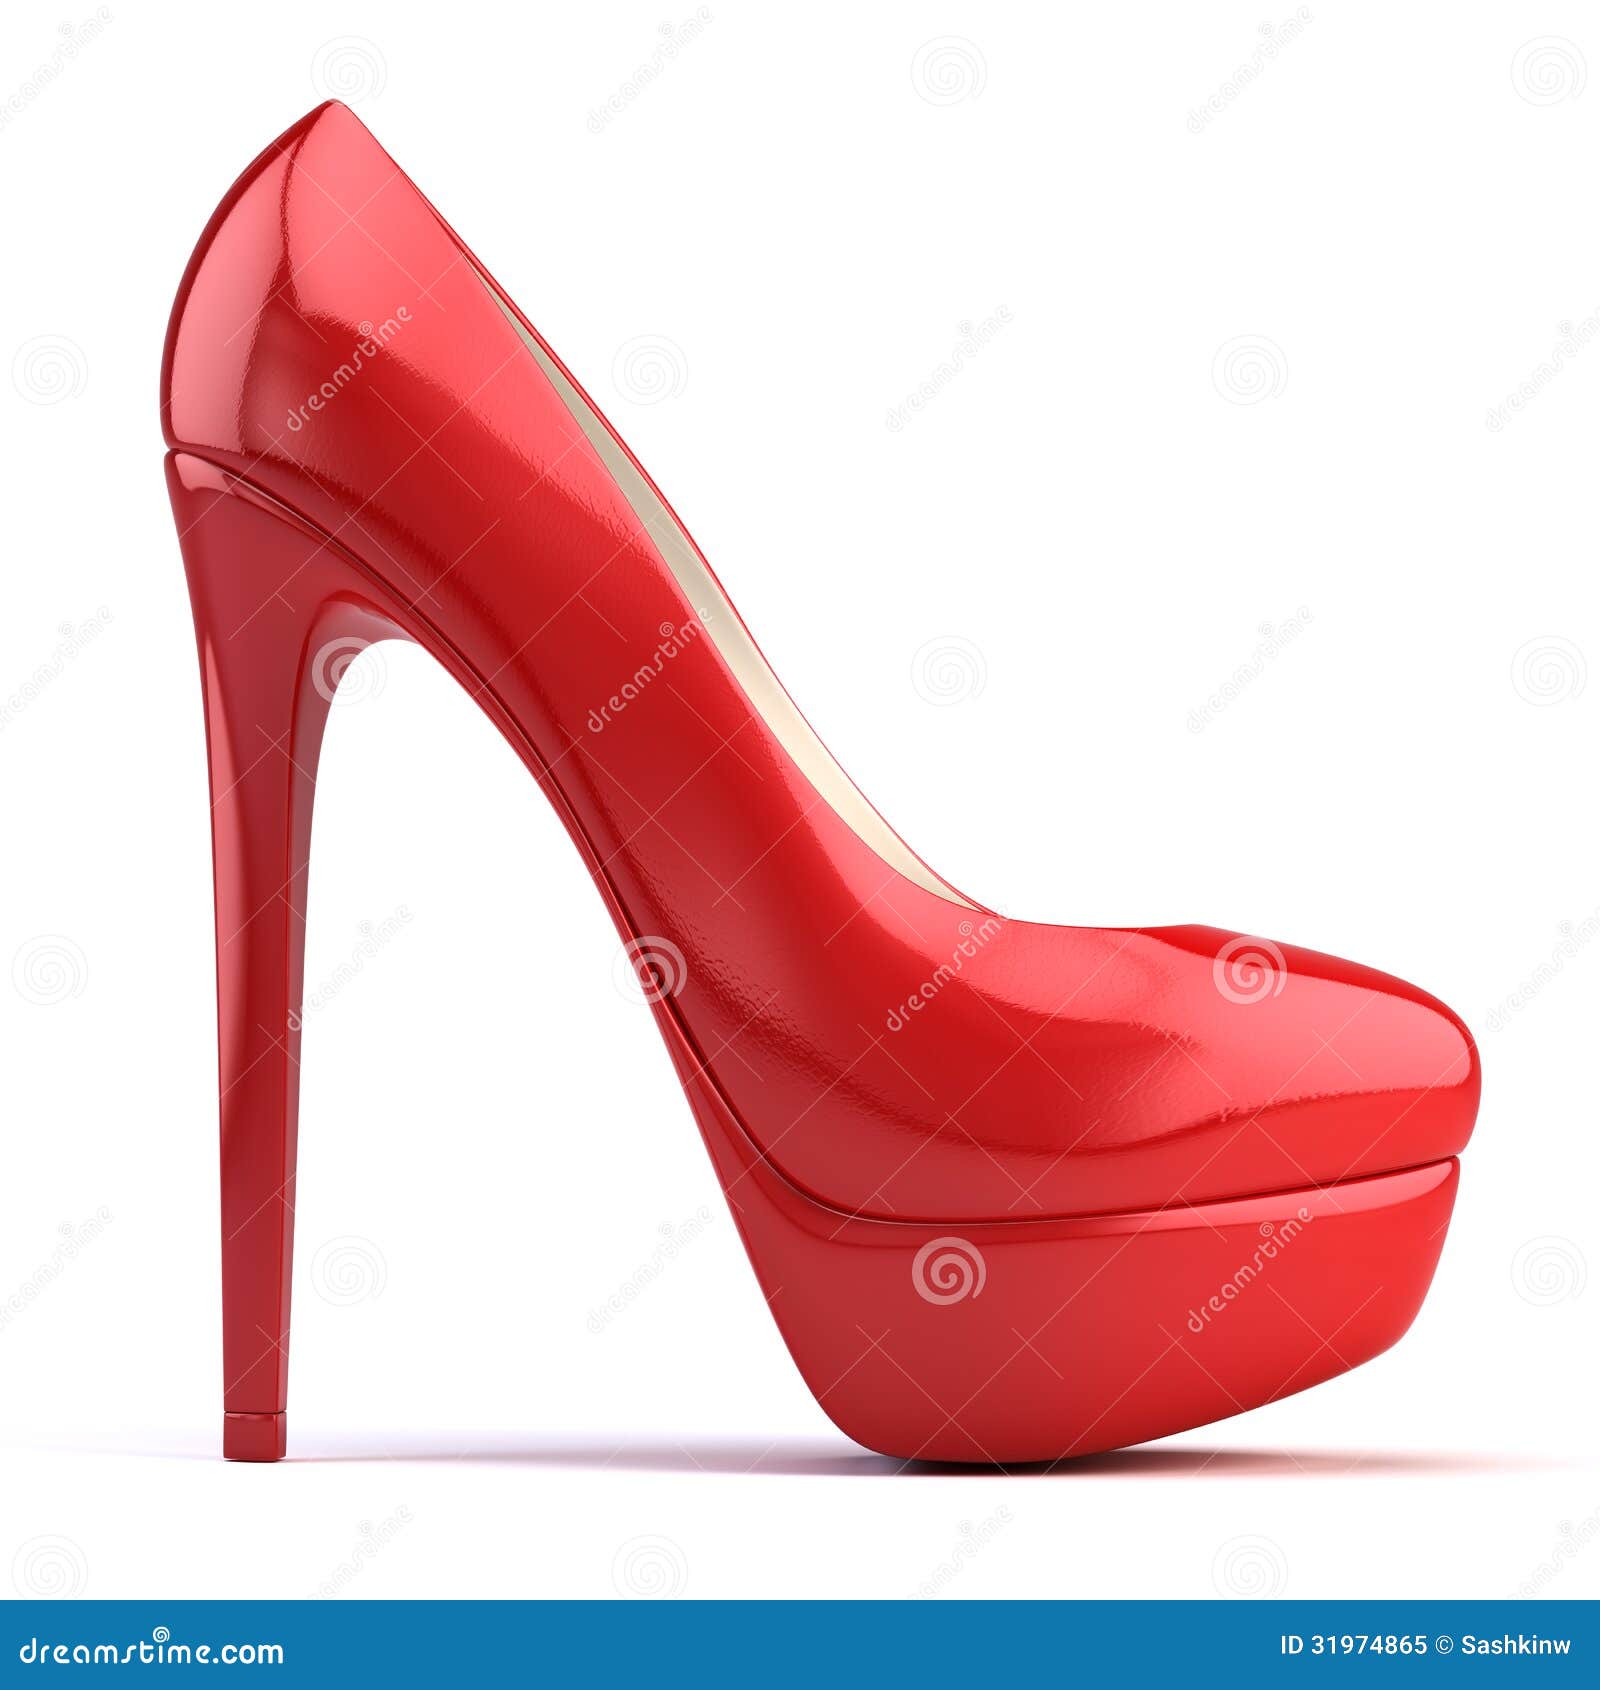 Red high heel shoes stock illustration. Illustration of classic - 31974865